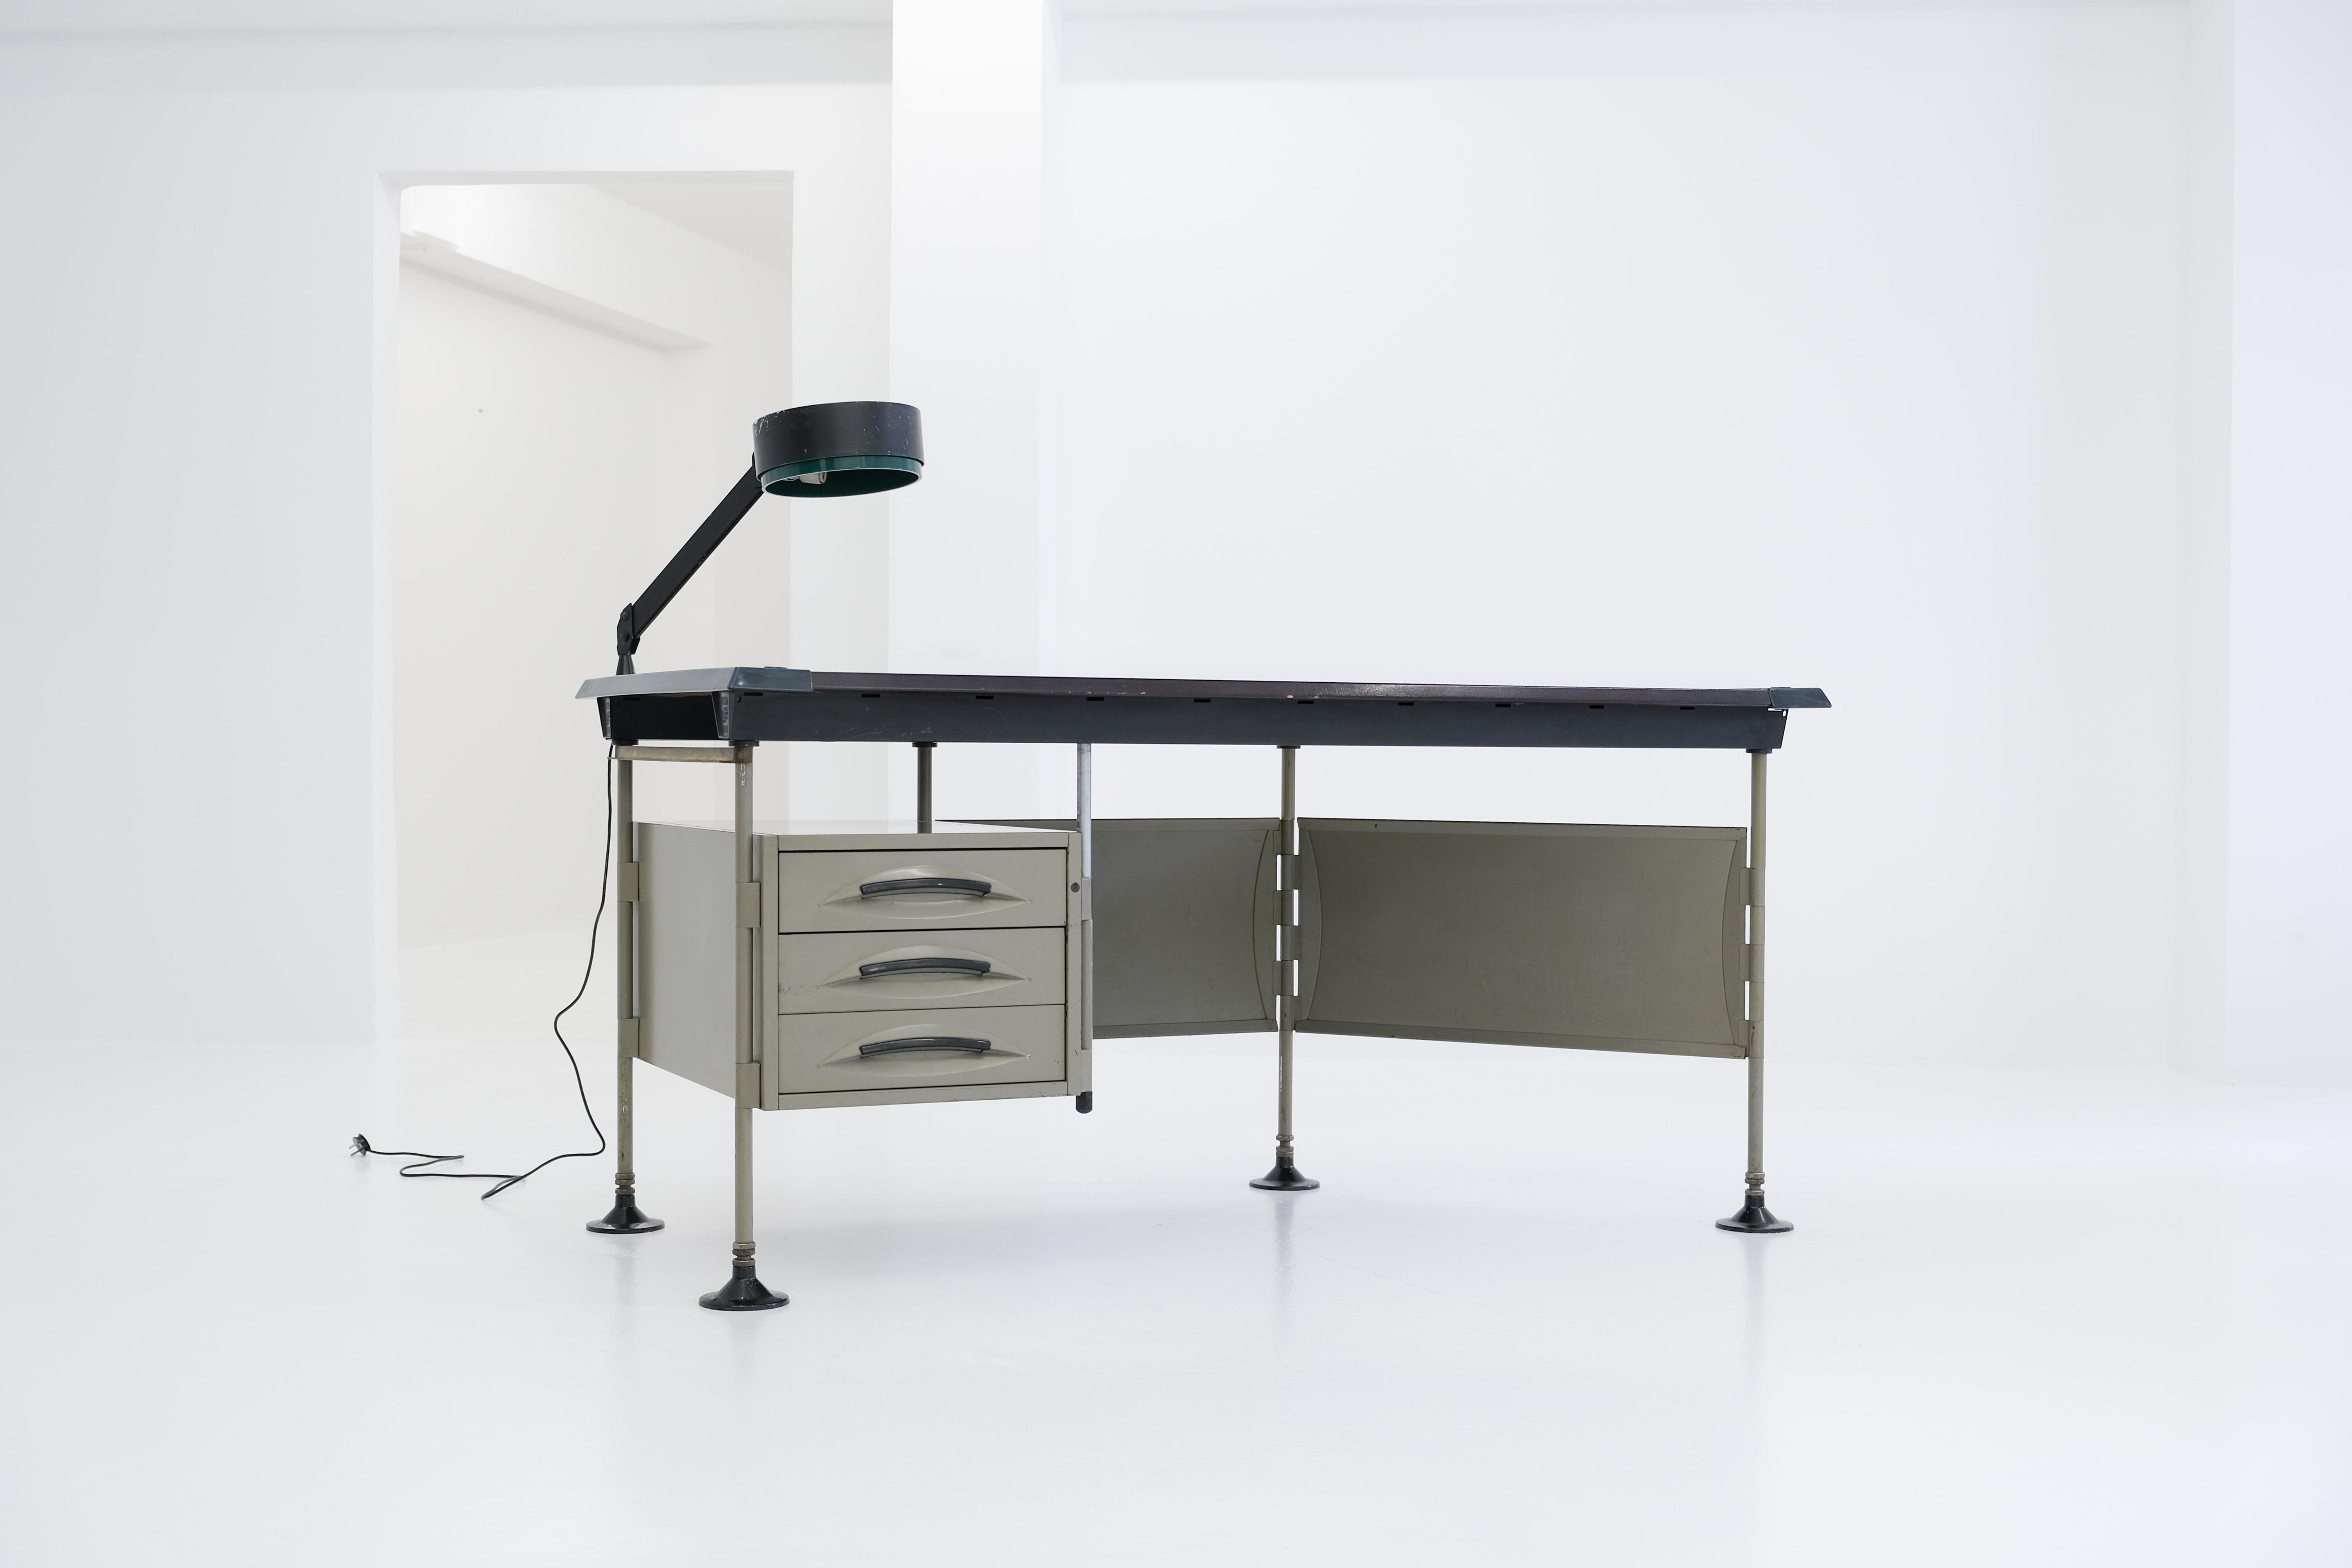 A special desk from the modular spazio series, on one side with a drawer container, on the other side with a diagonally arranged panel. An original adjustable desk light accompanies the table and contributes to the striking, Authentic appearance of